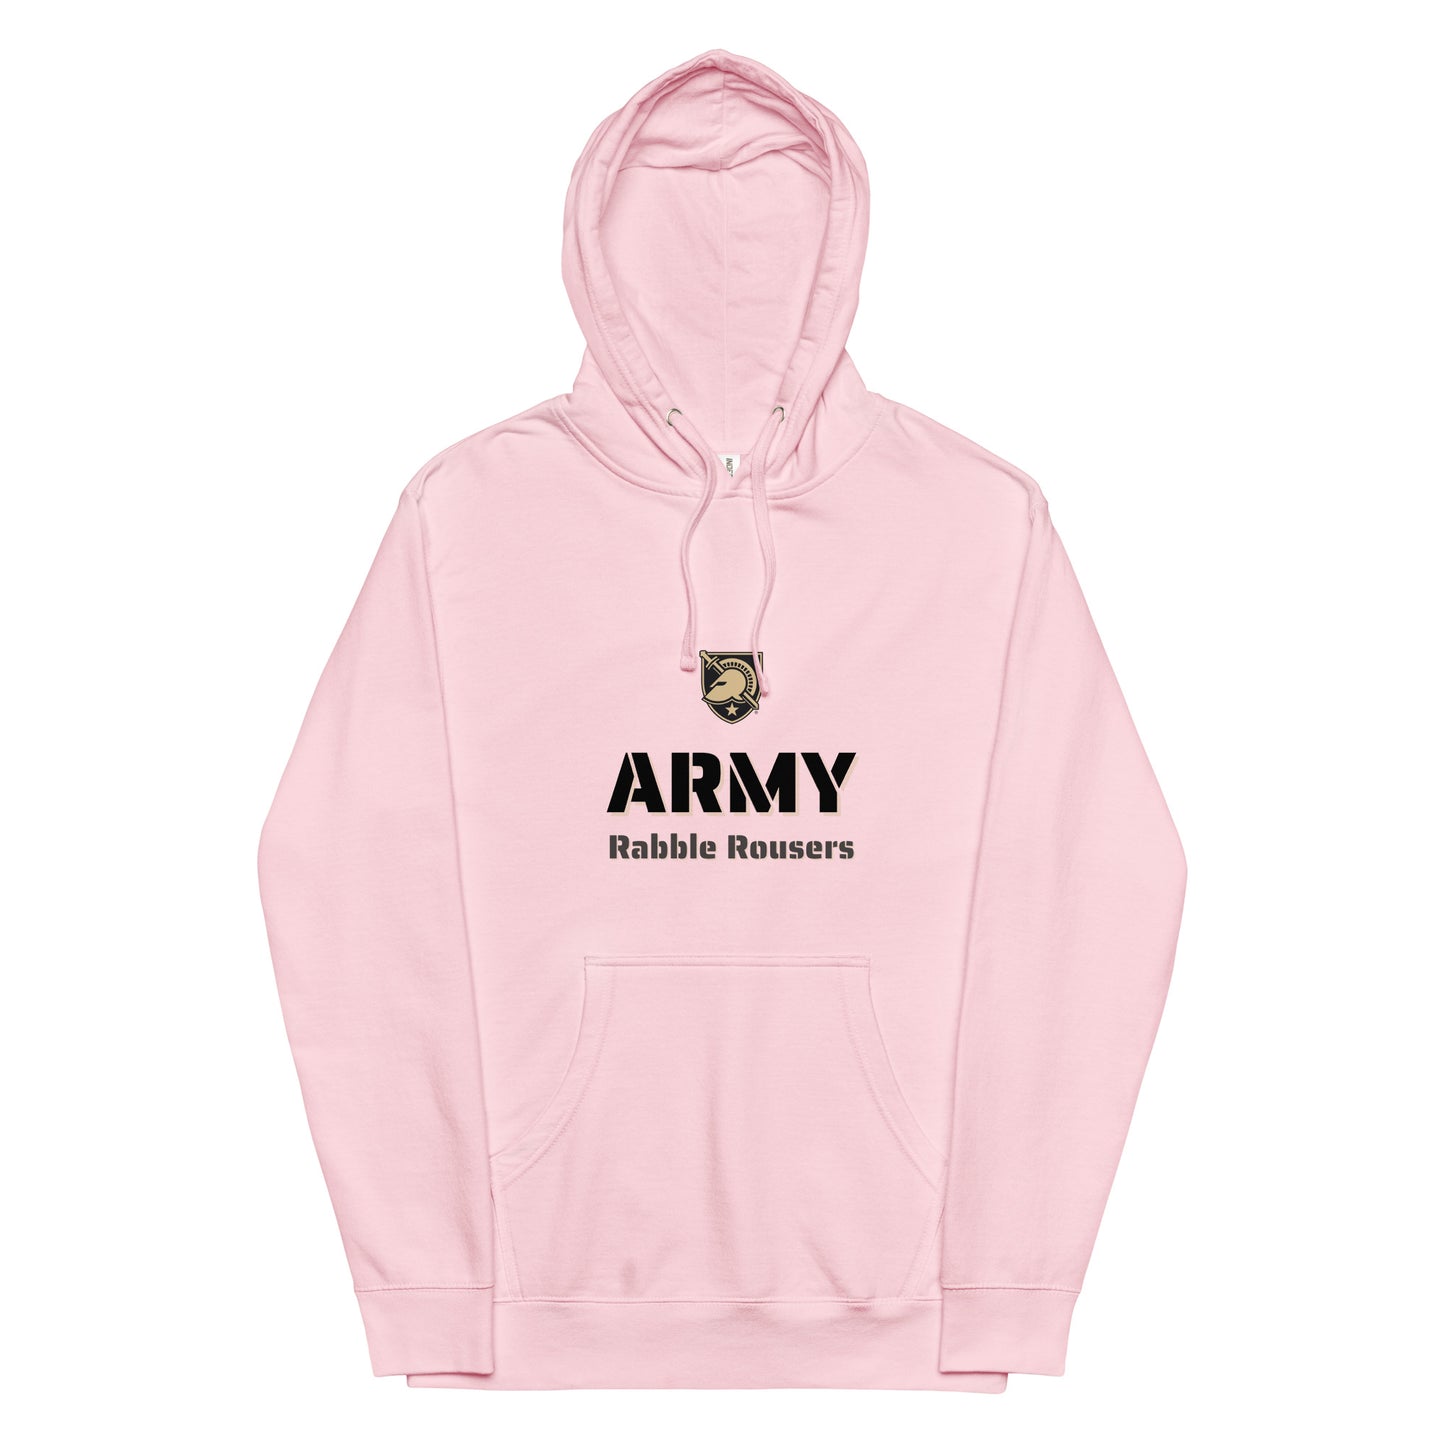 "Army Rabble Rousers"  Unisex midweight hoodie